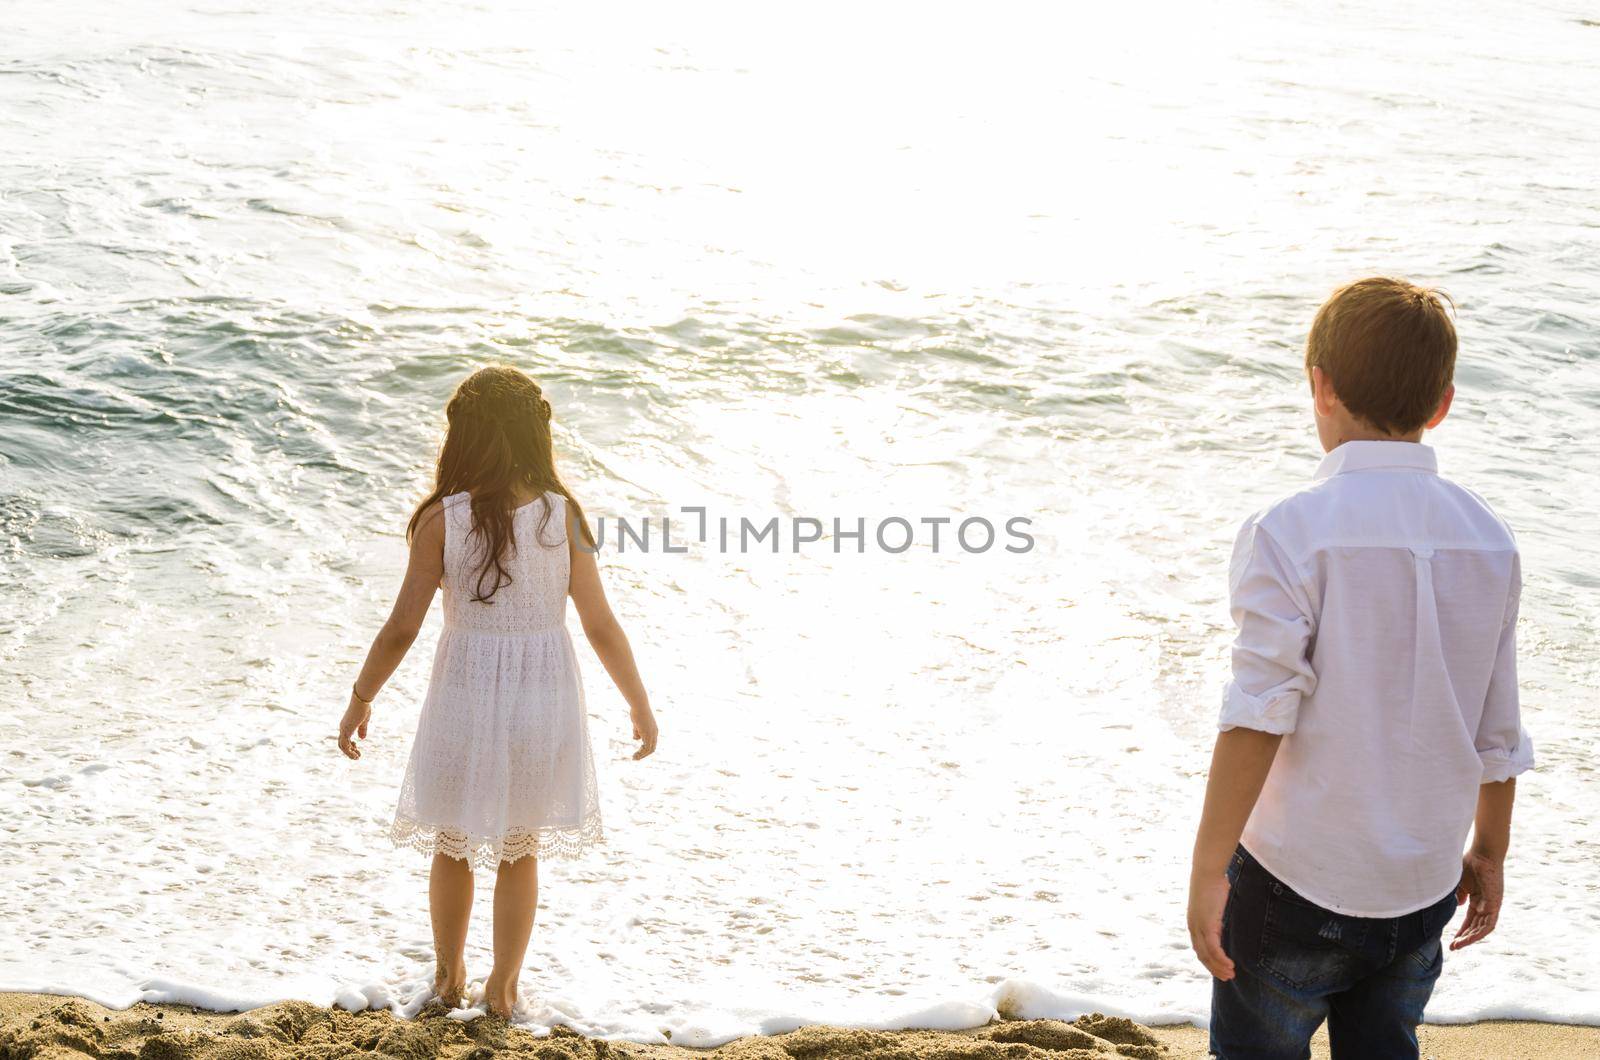 Children looking at the sea with his back to the camera by Peruphotoart